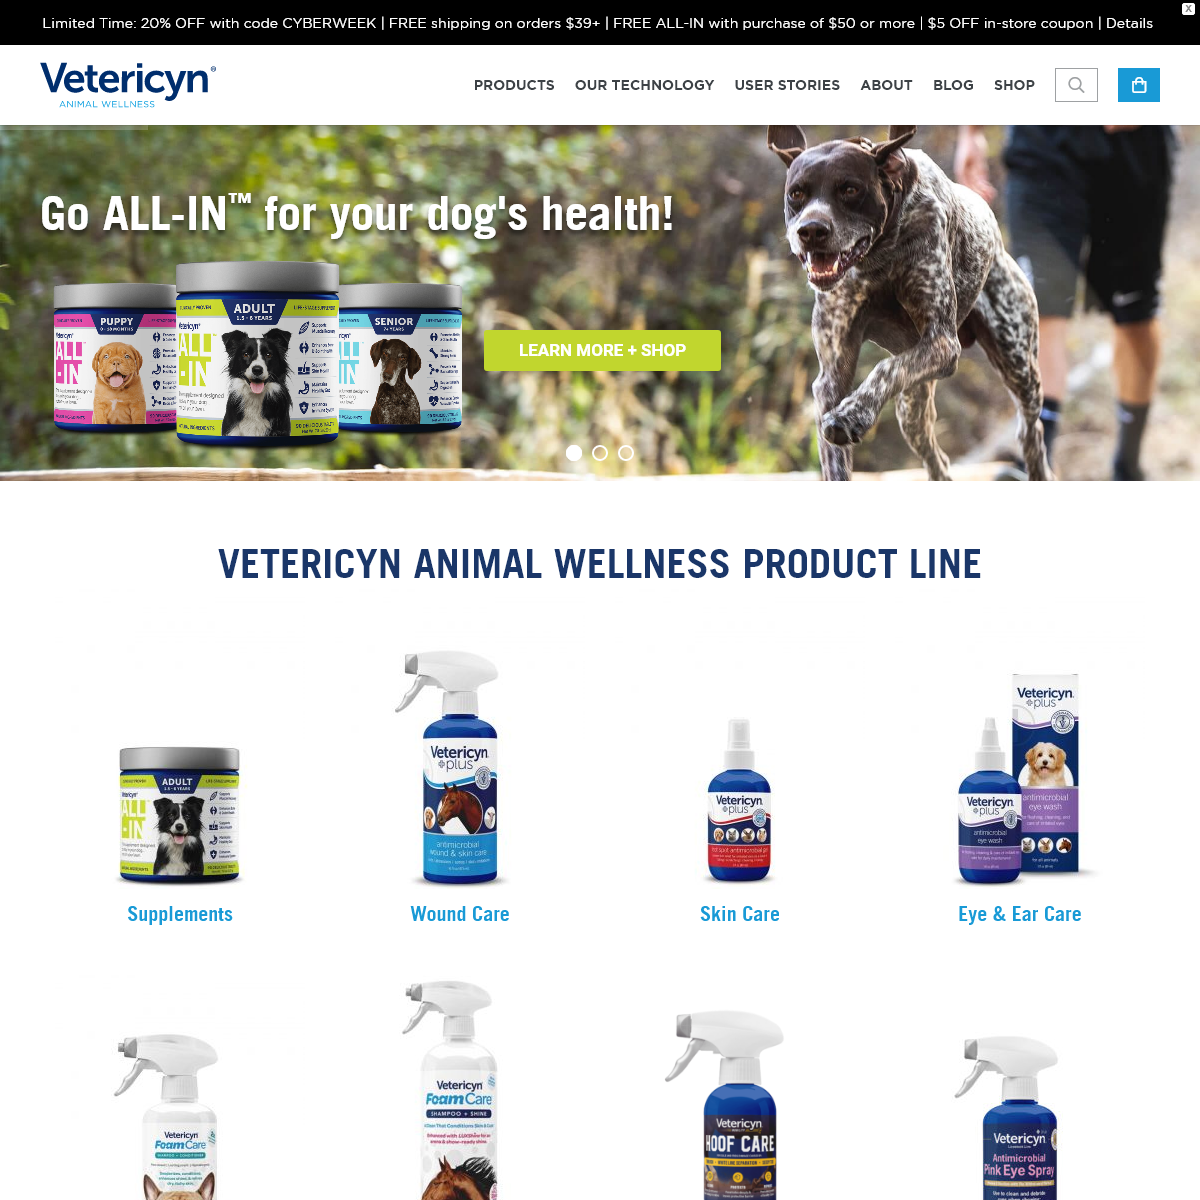 A complete backup of vetericyn.com